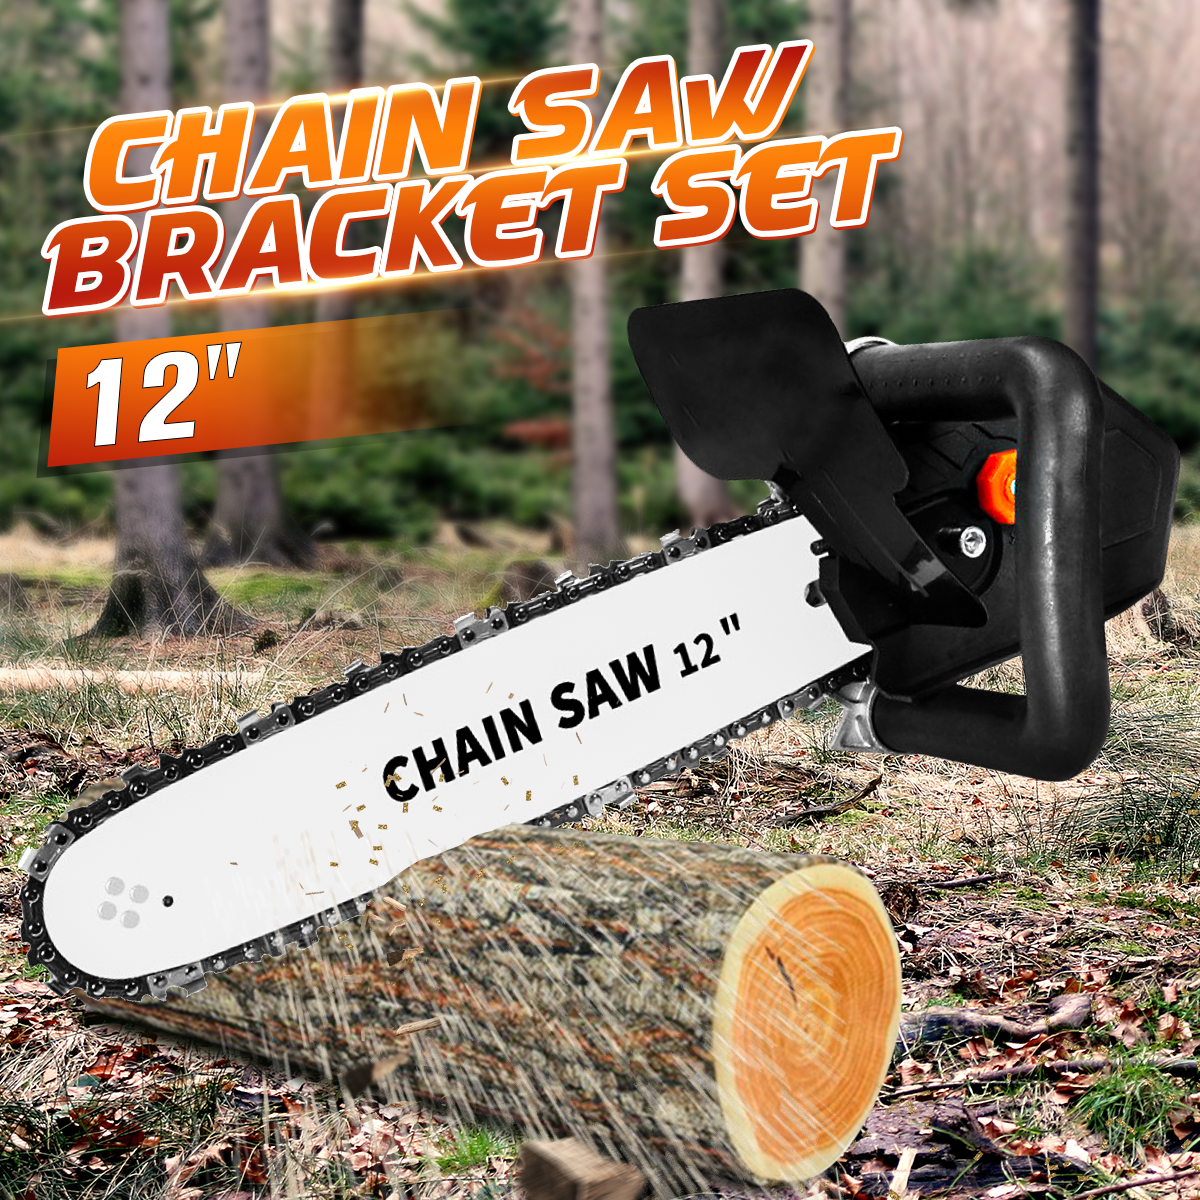 12-Inch-Chainsaw-Bracket-Electric-Chain-Saw-Stand-Set-Part-For-100-Angle-Grinder-1755370-2